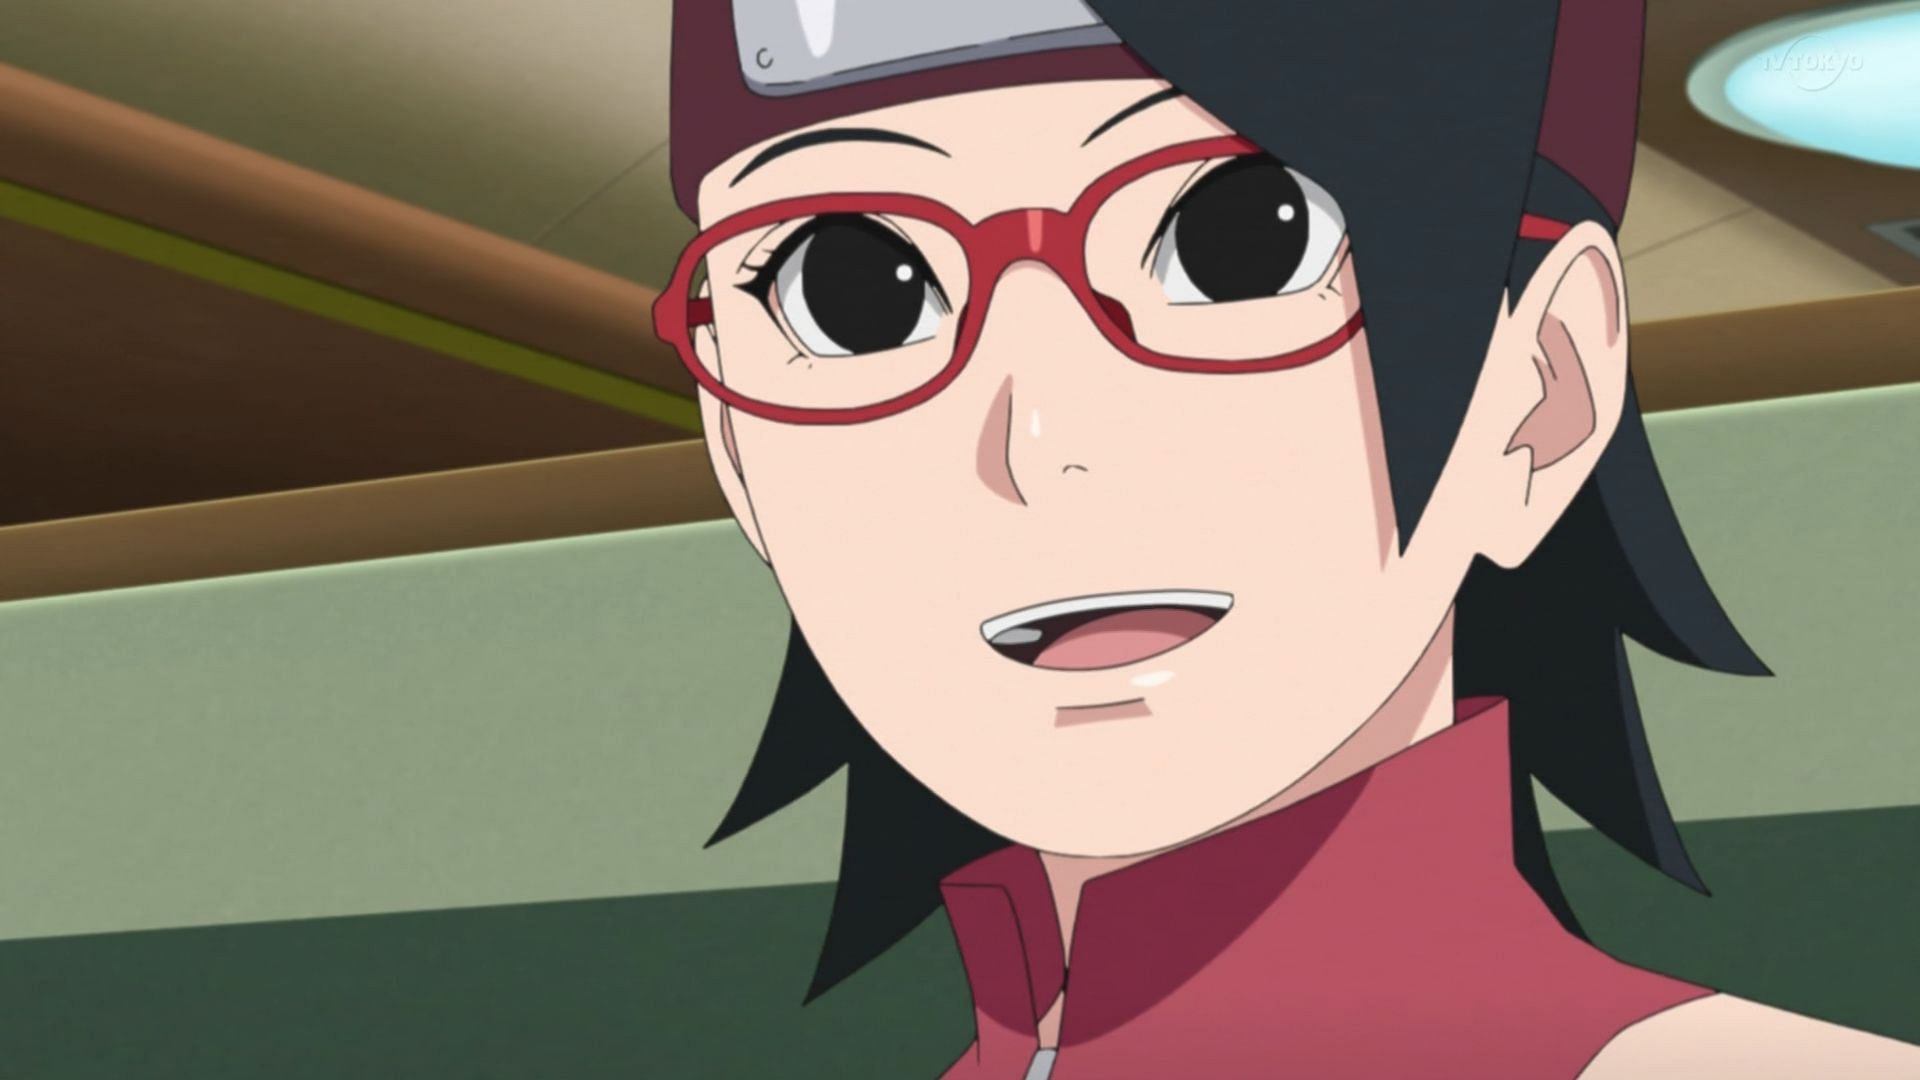 opinions on uchiha sarada. is she a good charater or not in ur